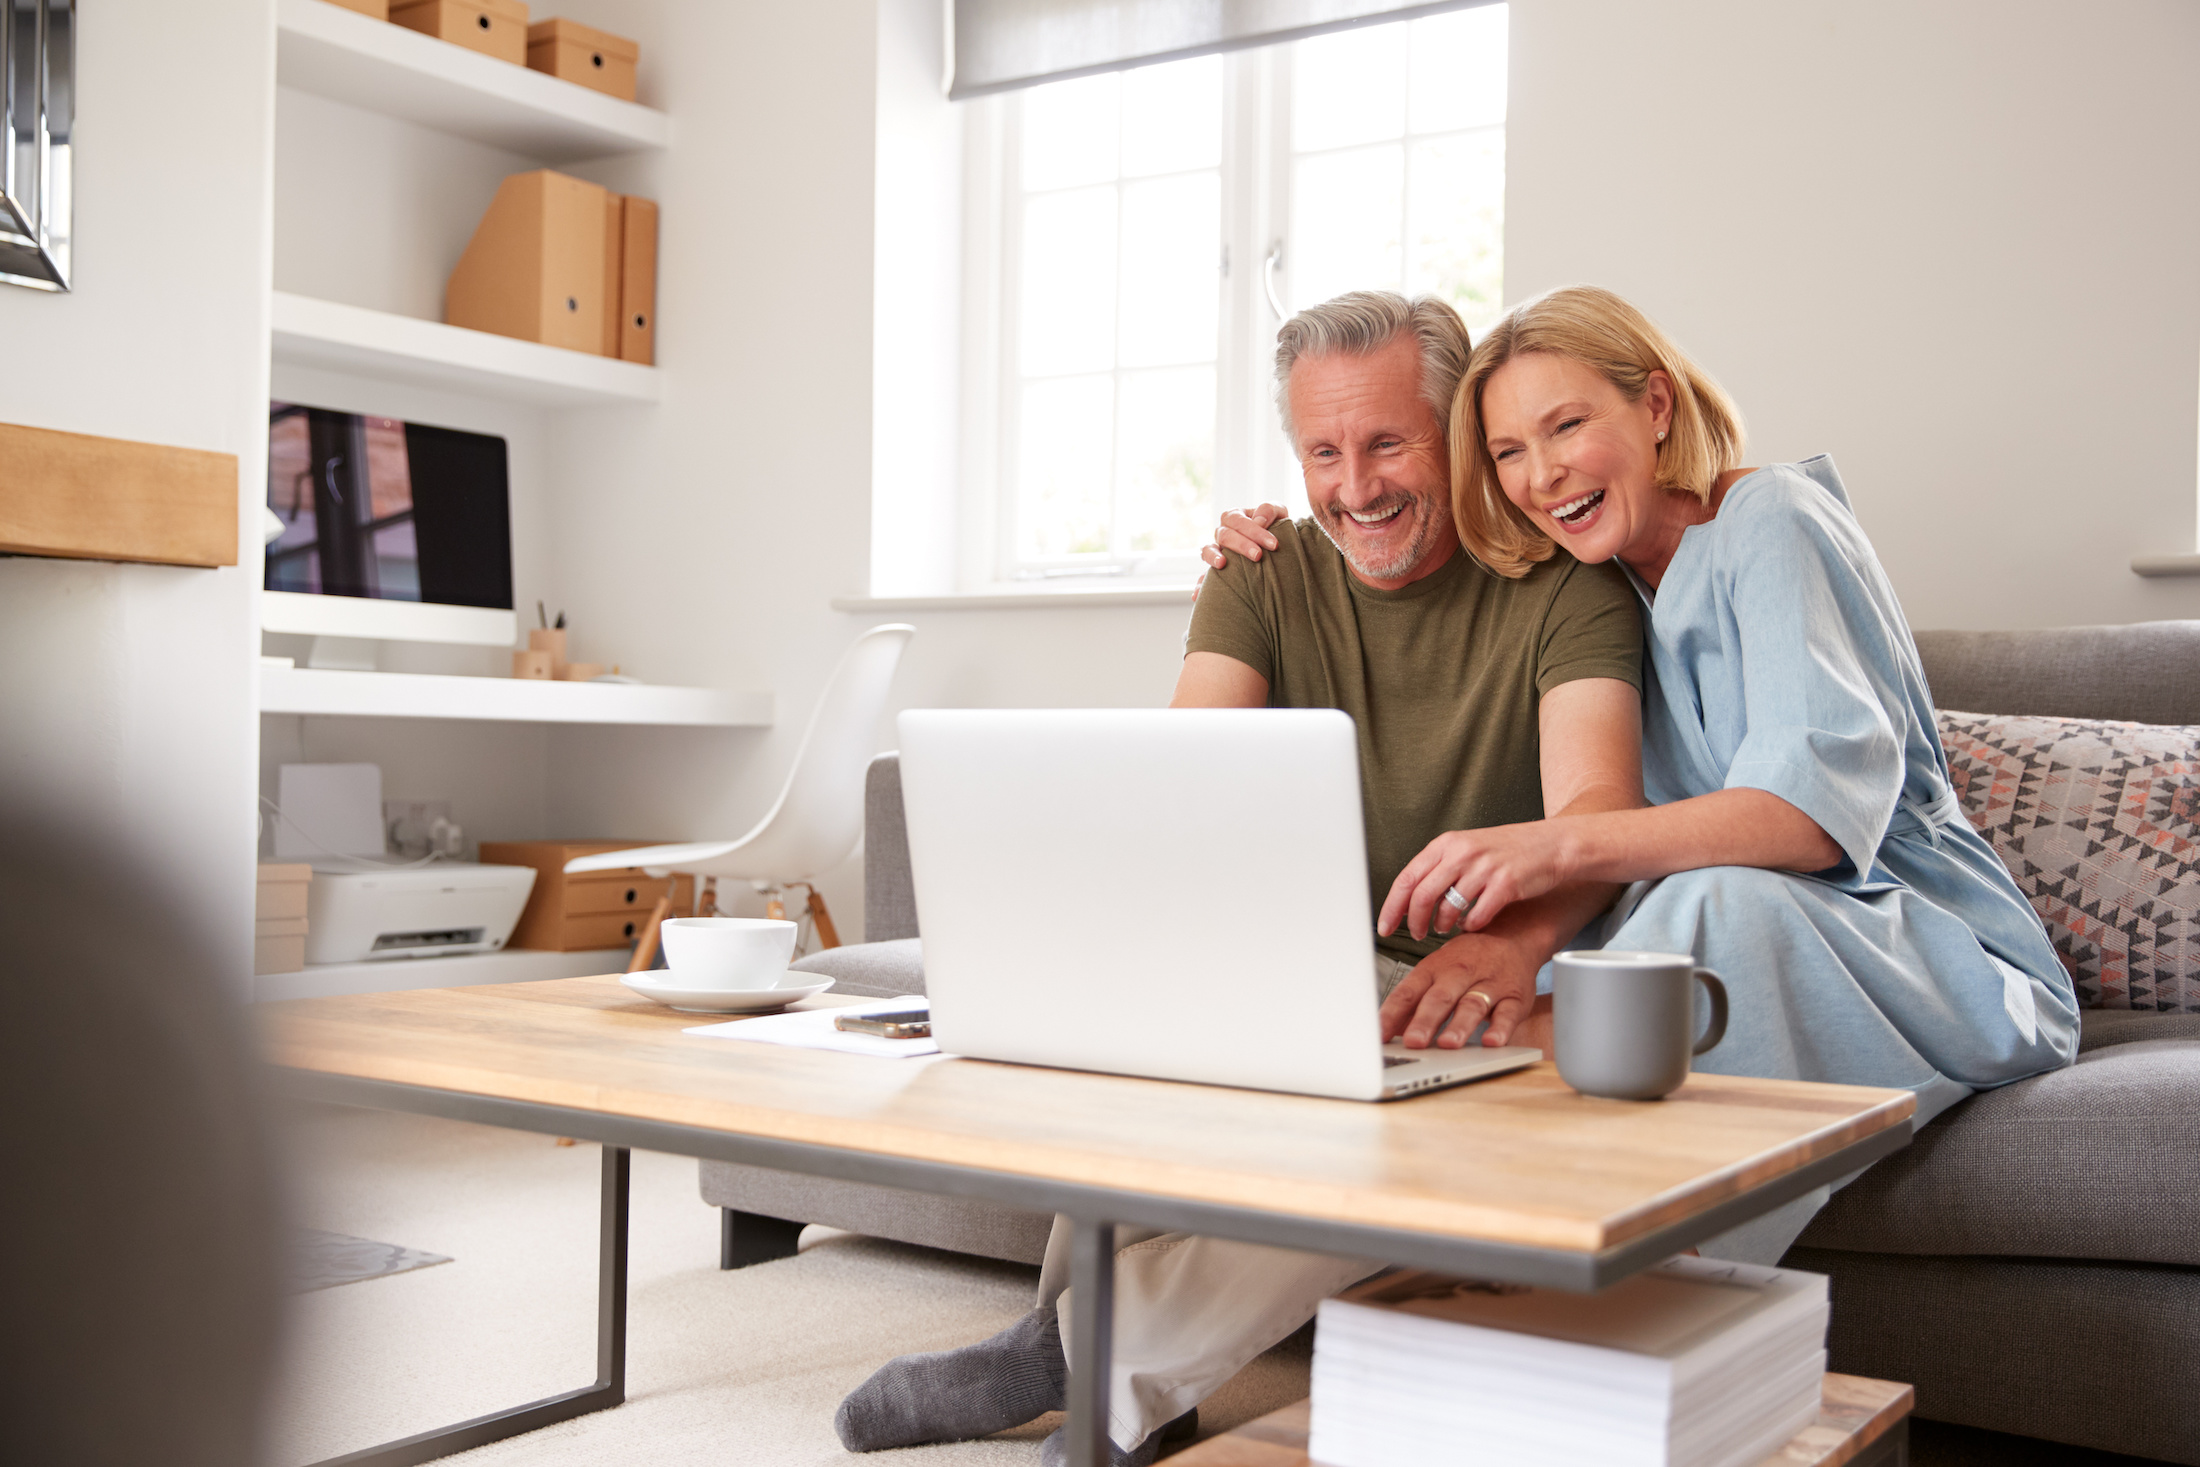 Laughing couple looking at a laptop in a living room